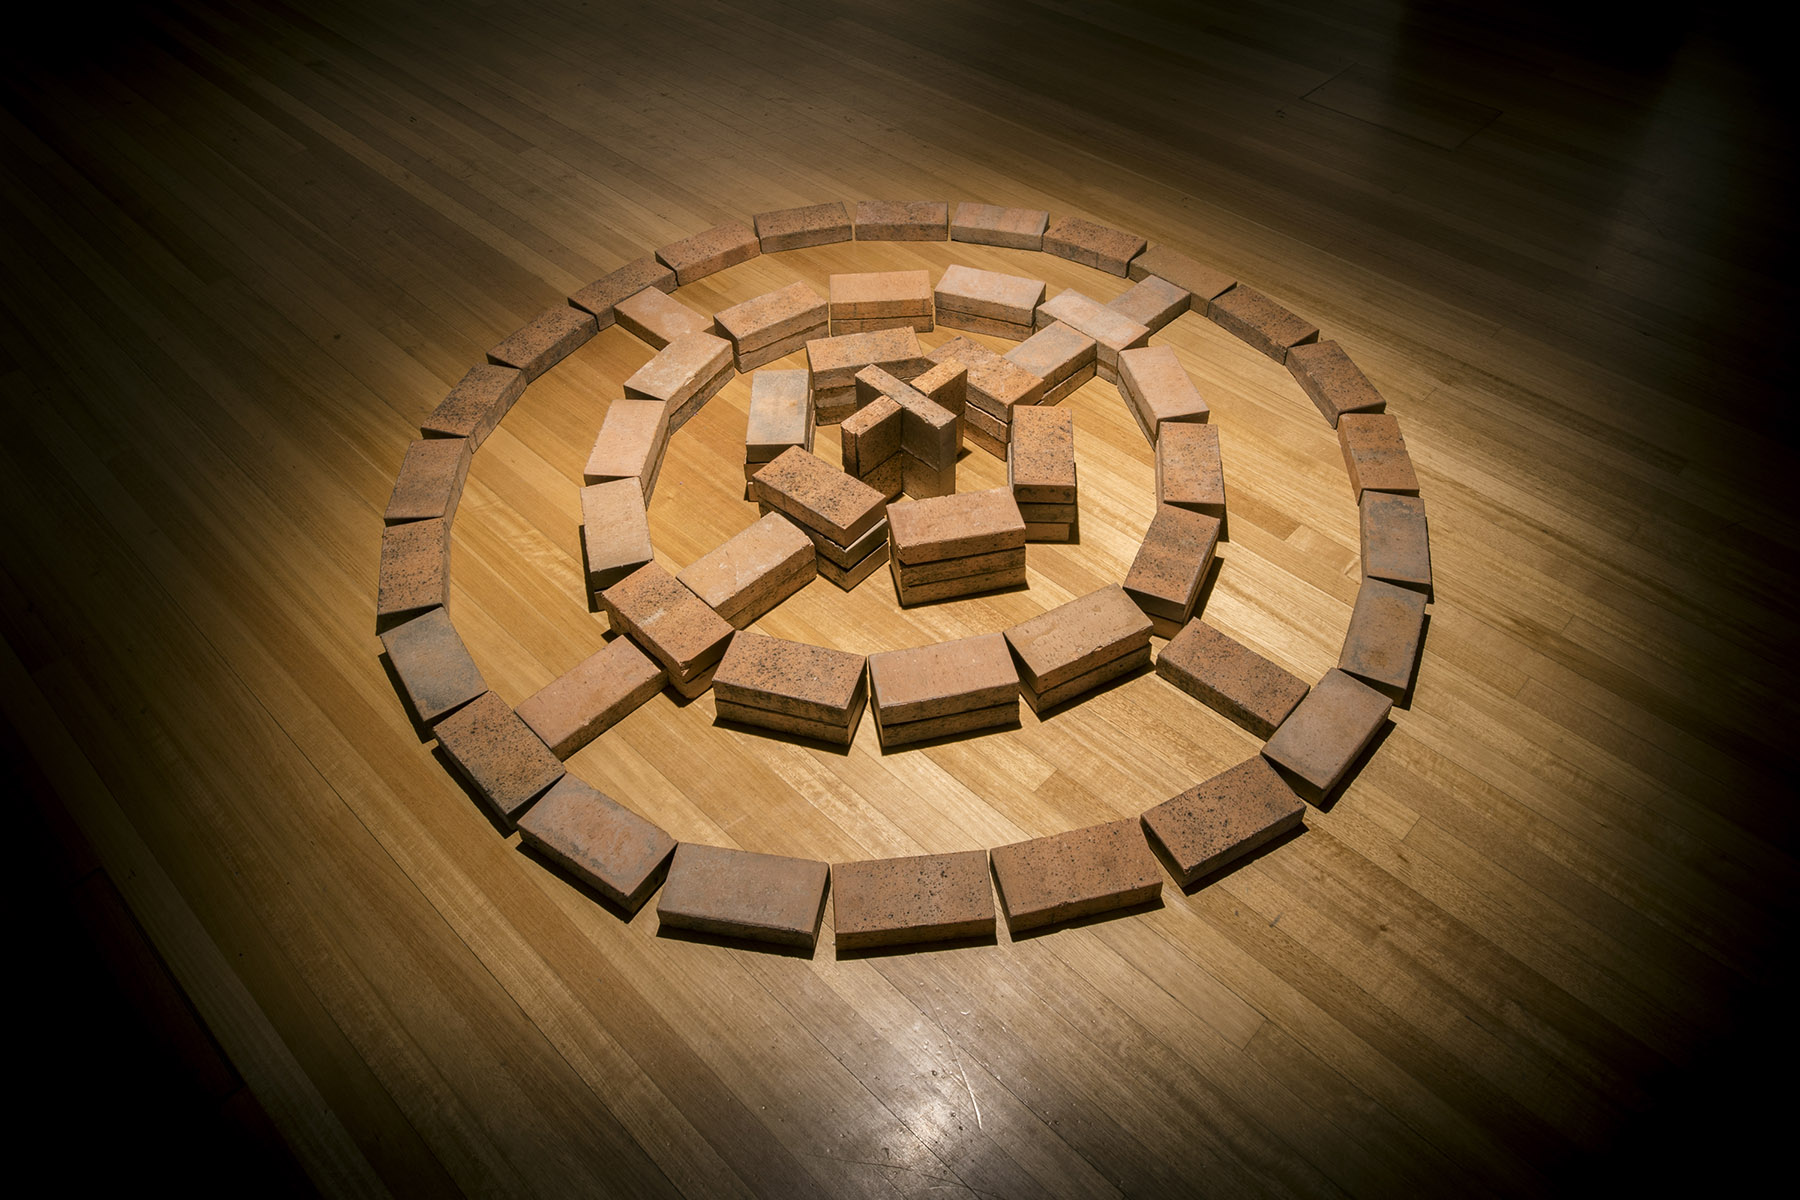 Bricks on the floor in the shape of a circle